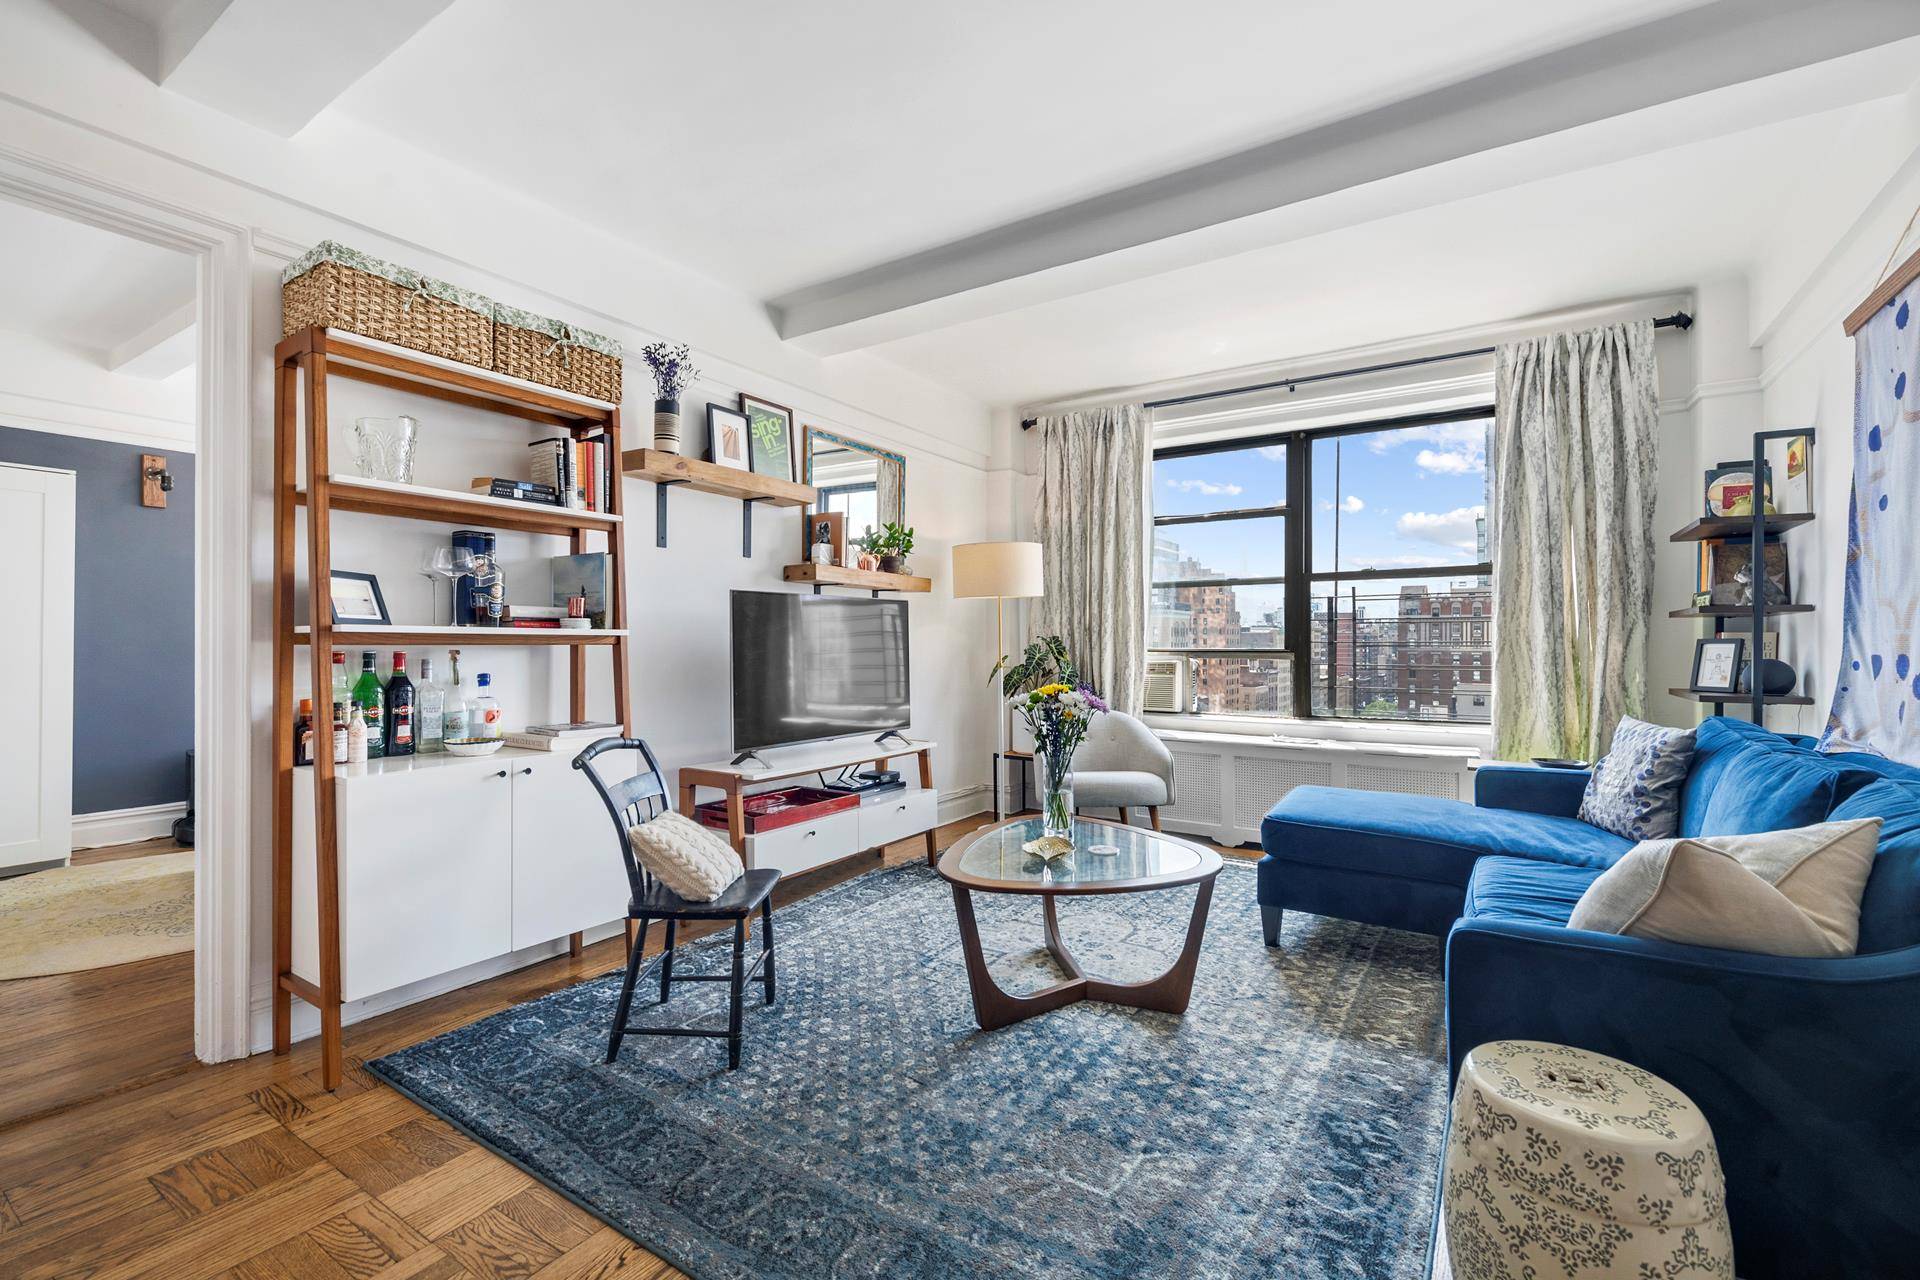 Enjoy the light and amazing views to midtown from this high floor one bedroom apartment.